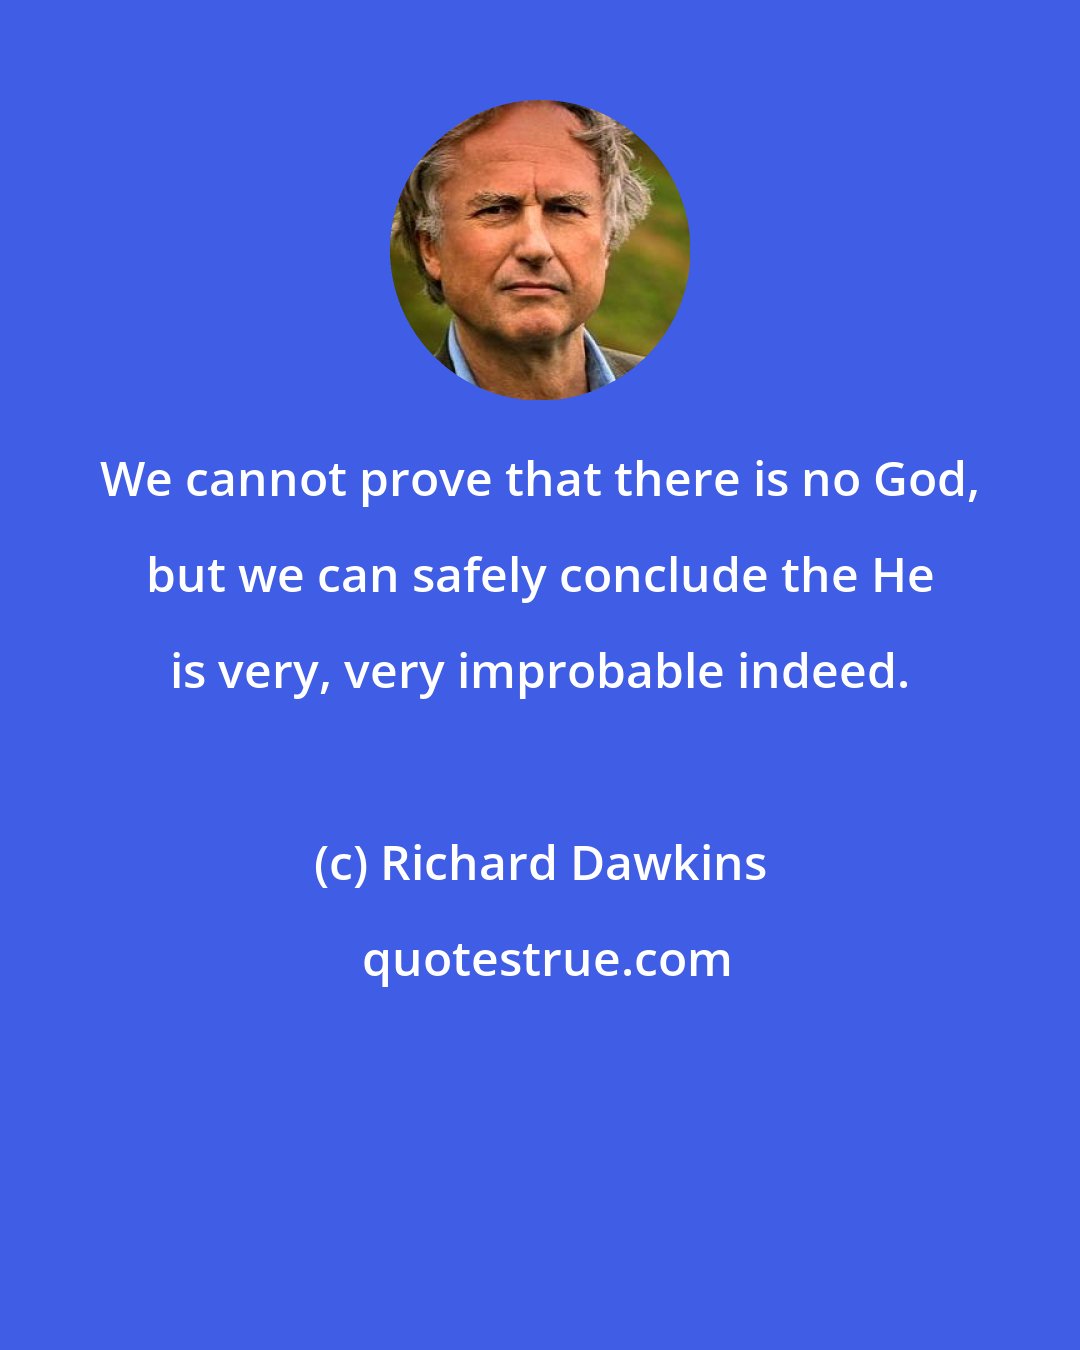 Richard Dawkins: We cannot prove that there is no God, but we can safely conclude the He is very, very improbable indeed.